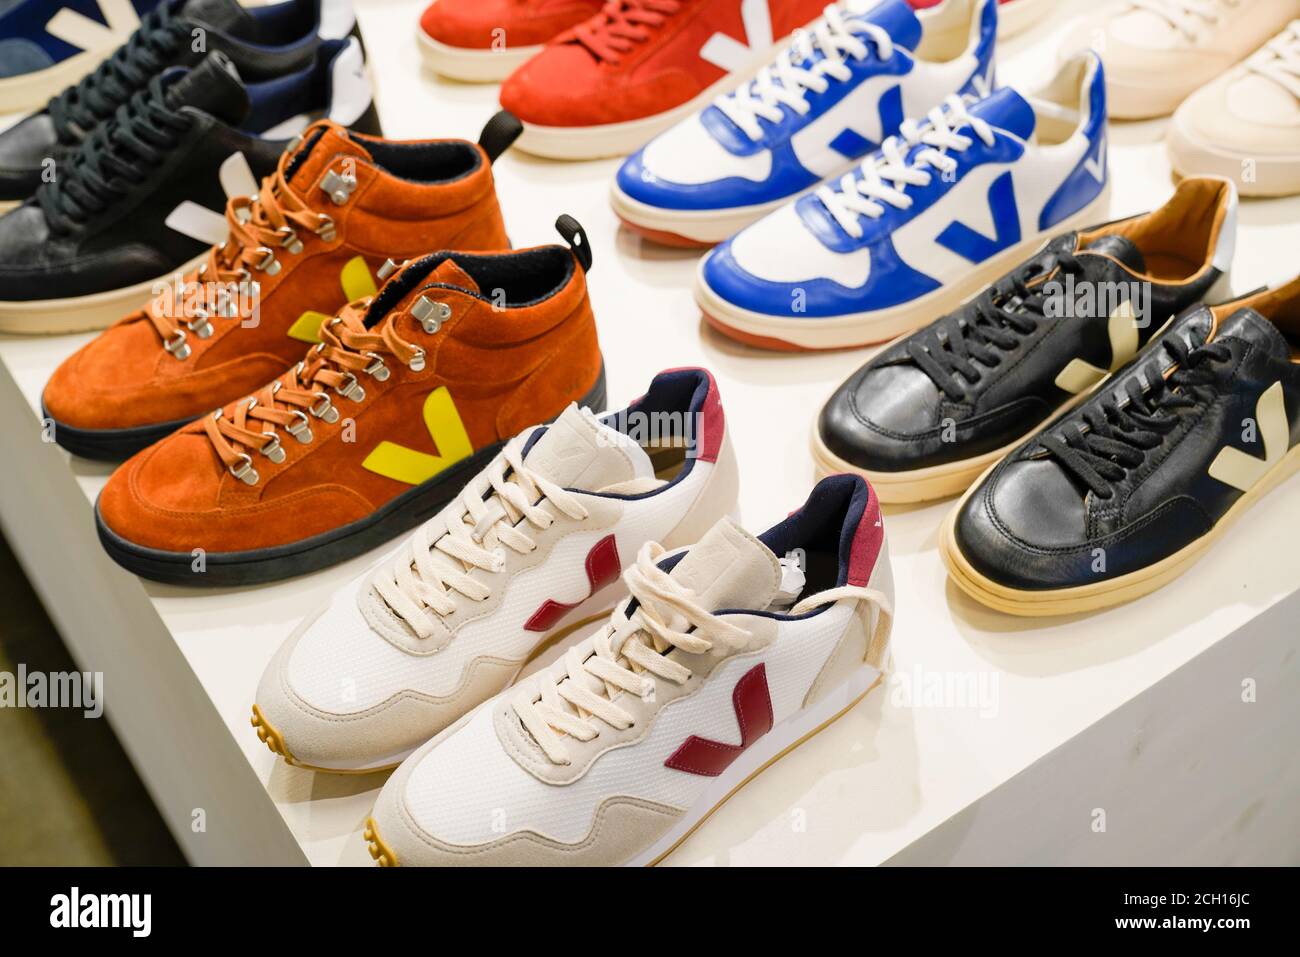 Bordeaux , Aquitaine / France - 09 01 2020 : veja shoes many sneakers  produced in dignified conditions direct producer manufacturers Stock Photo  - Alamy